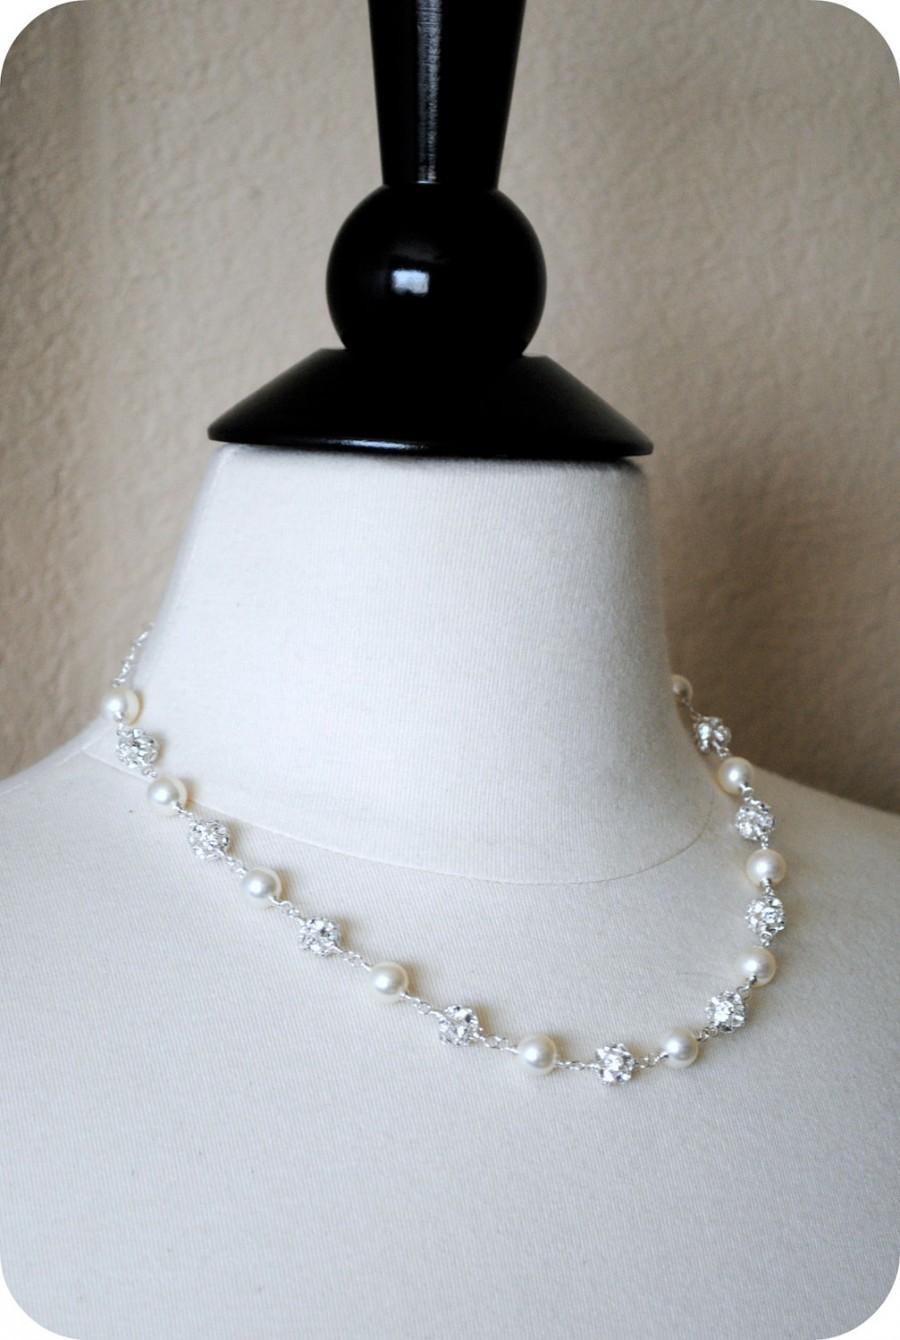 Hochzeit - Pearl Necklace, Bridal Rhinestone Necklace, Elegant Wedding Necklace, Couture Necklace, Long, Layered, Ivory, White, Wire Wrapped